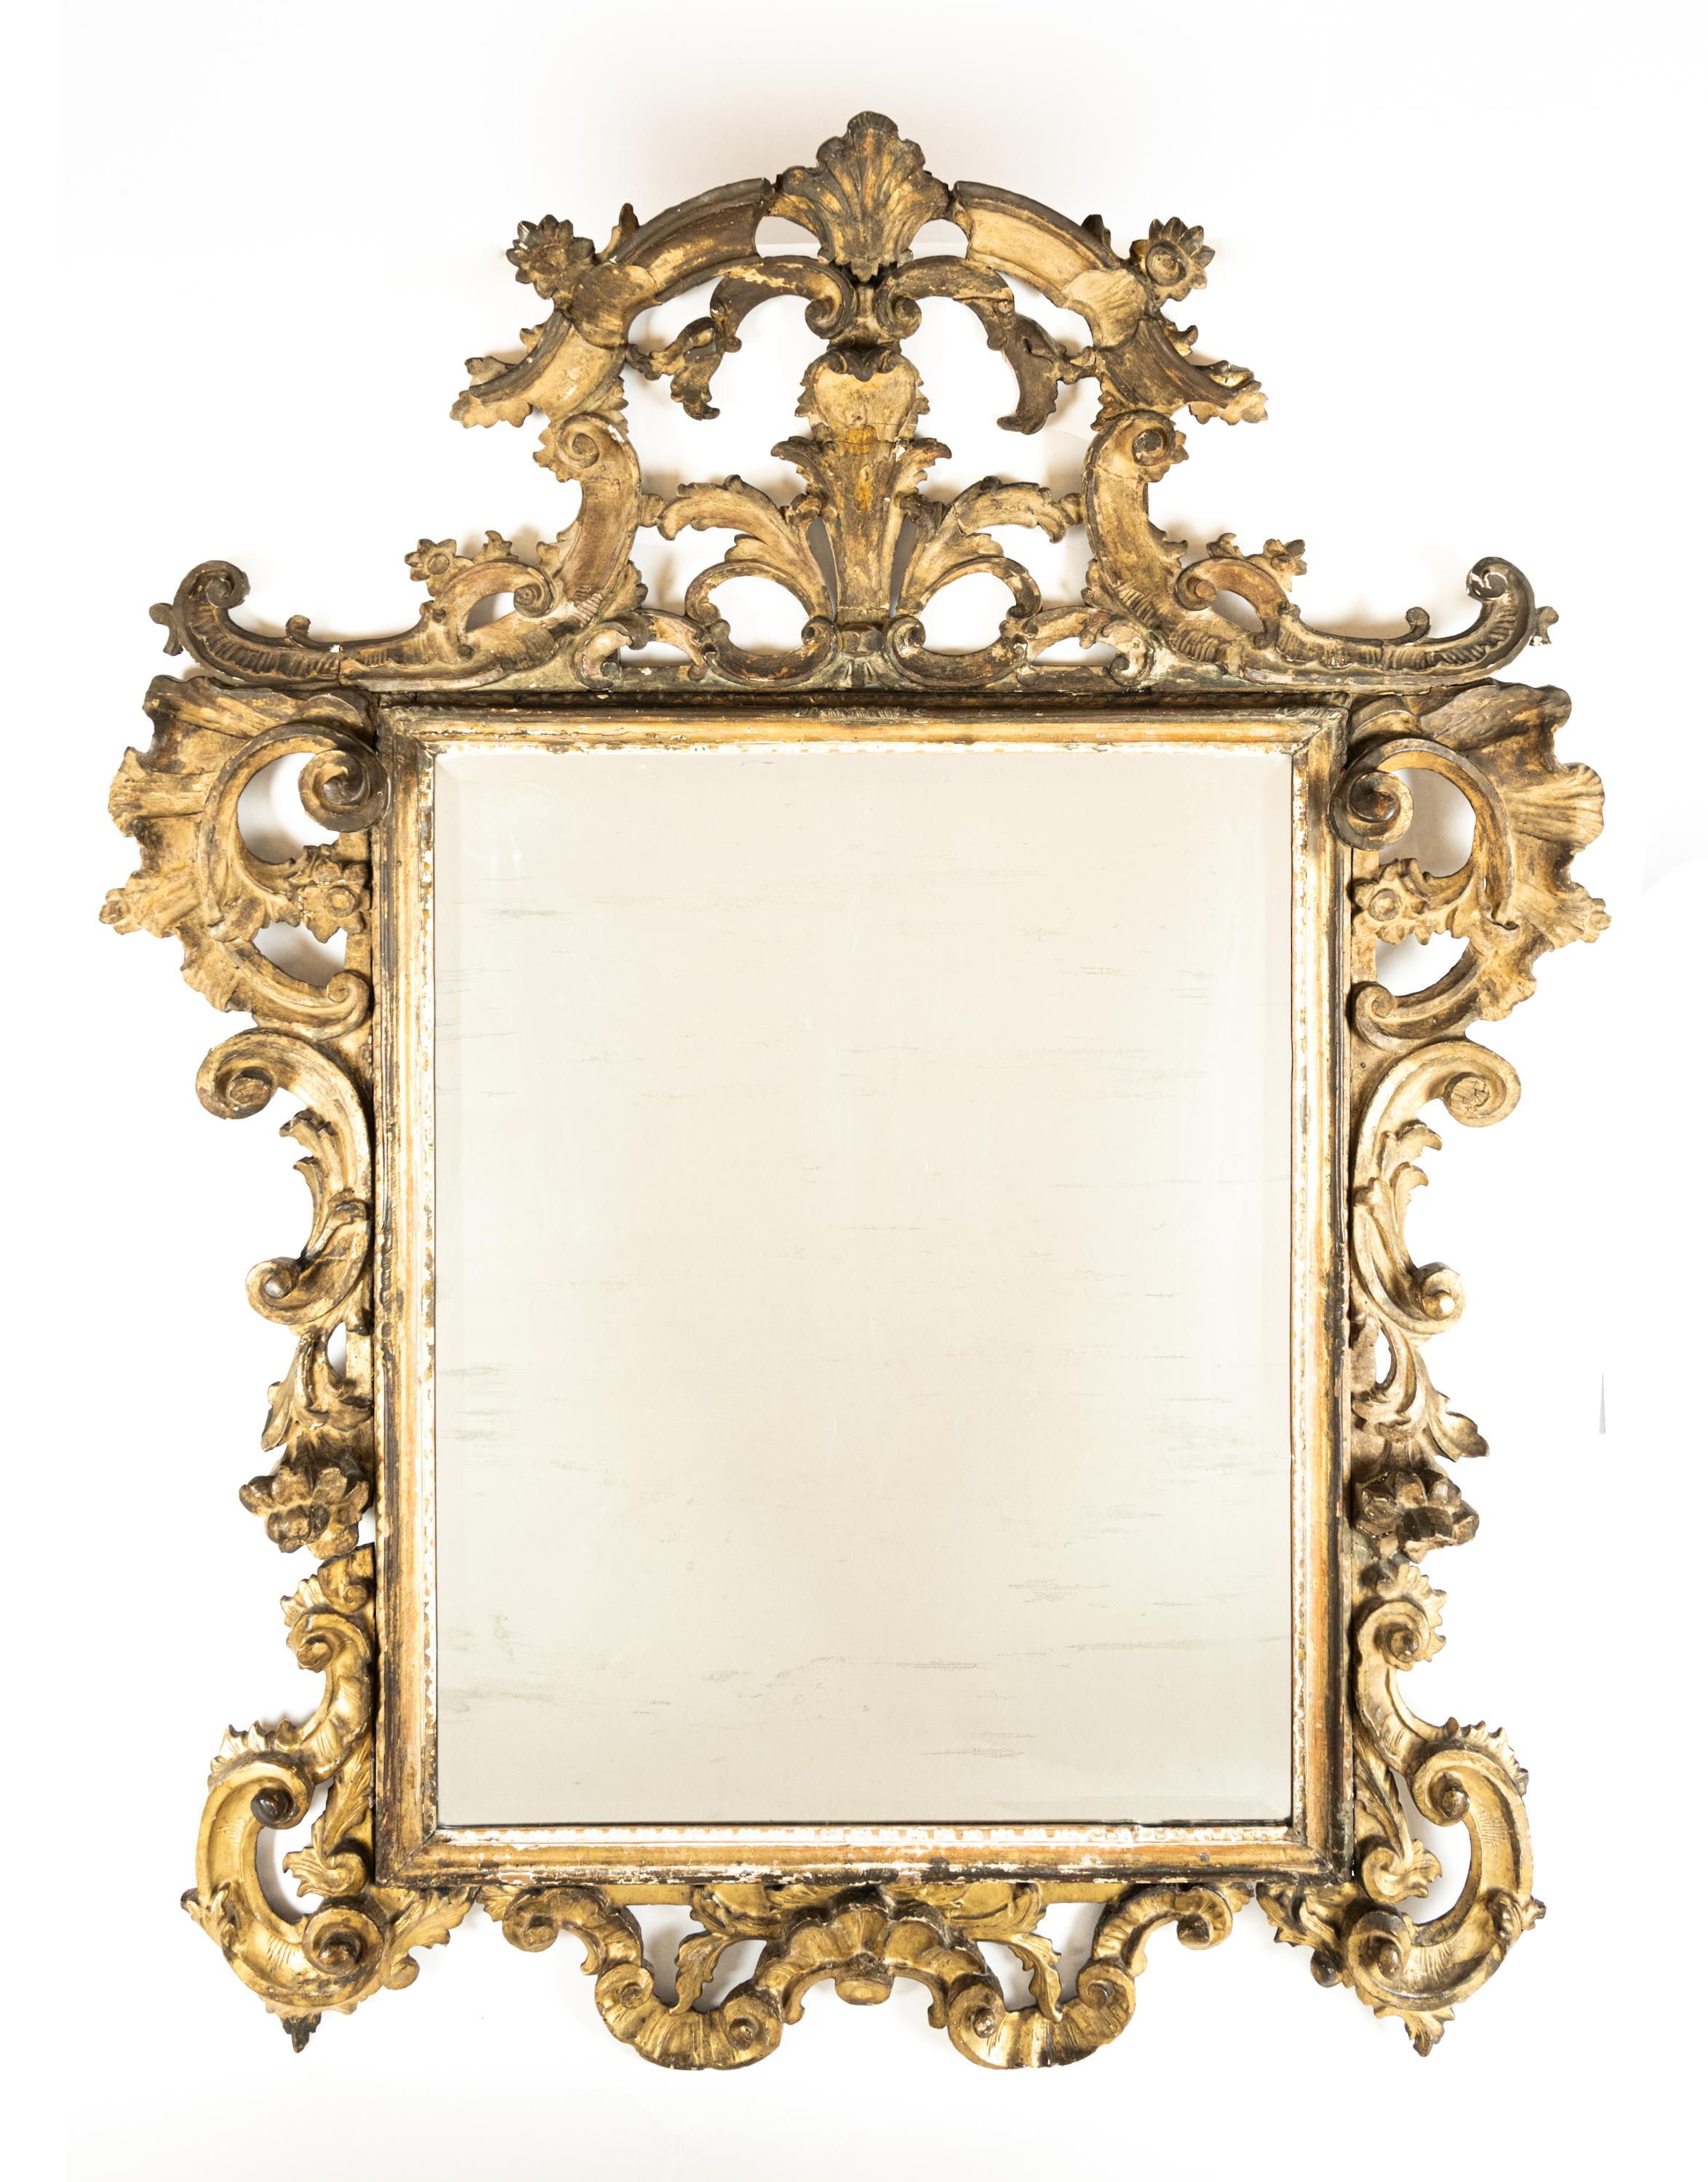 A large Italian Rococo carved gilt wood mirror. Having a rectangular vertical glass frame with a hand carved crested top formed by leaf, floral, and scroll motifs. Featuring pierced carving, creating a symmetrical frame, and a pleasant overall